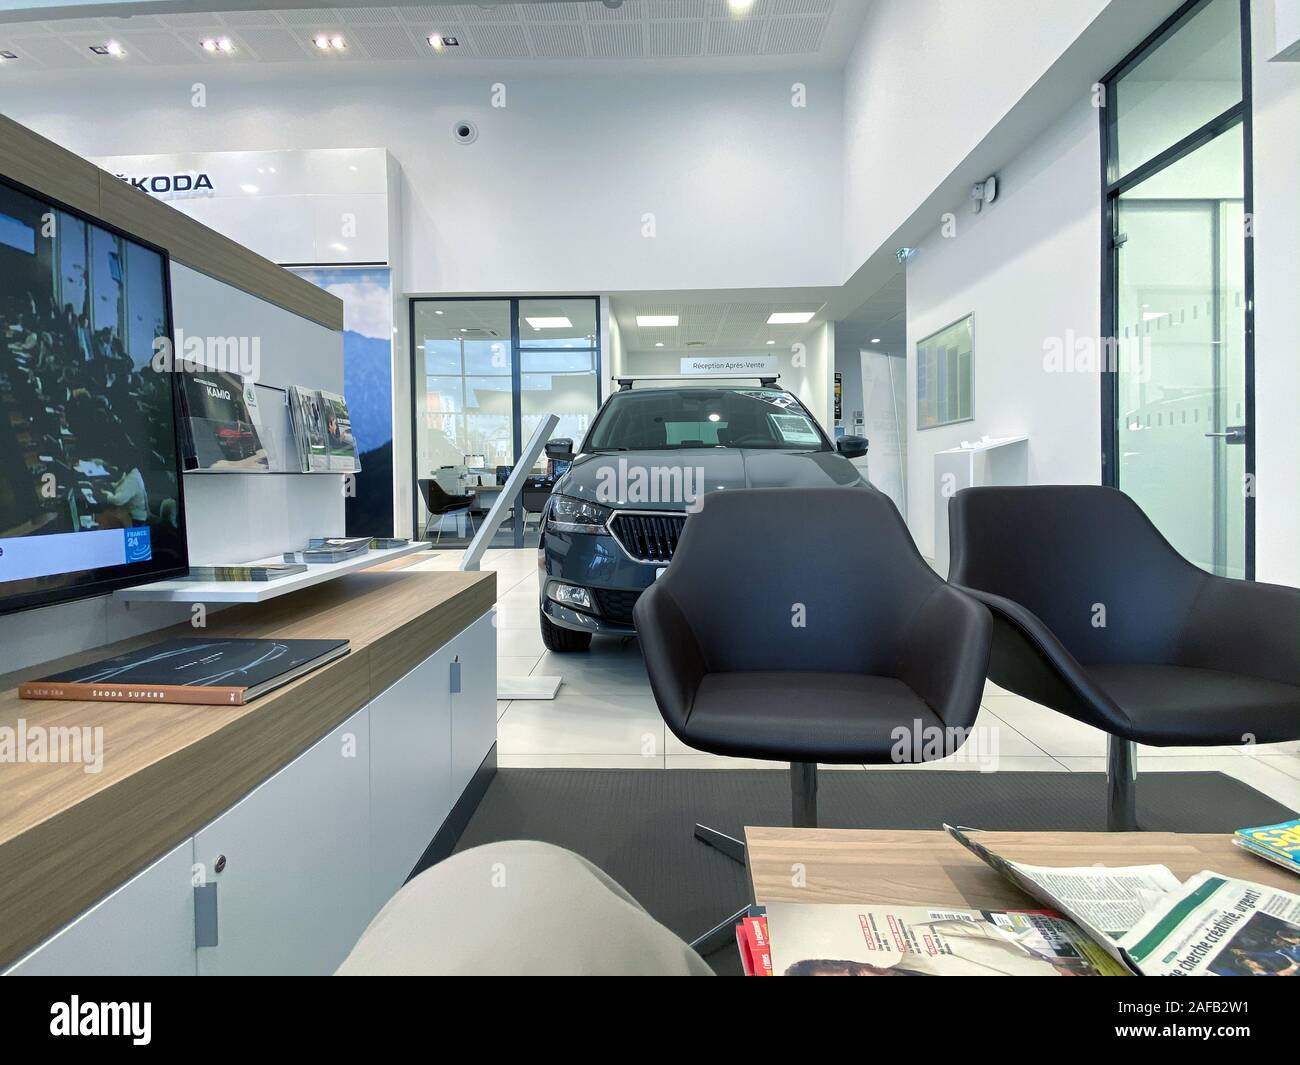 Paris, France - Oct 25, 2019: Interior of generic Skoda Car showroom with client waiting area with multiple magazines books and tv and car in background Stock Photo